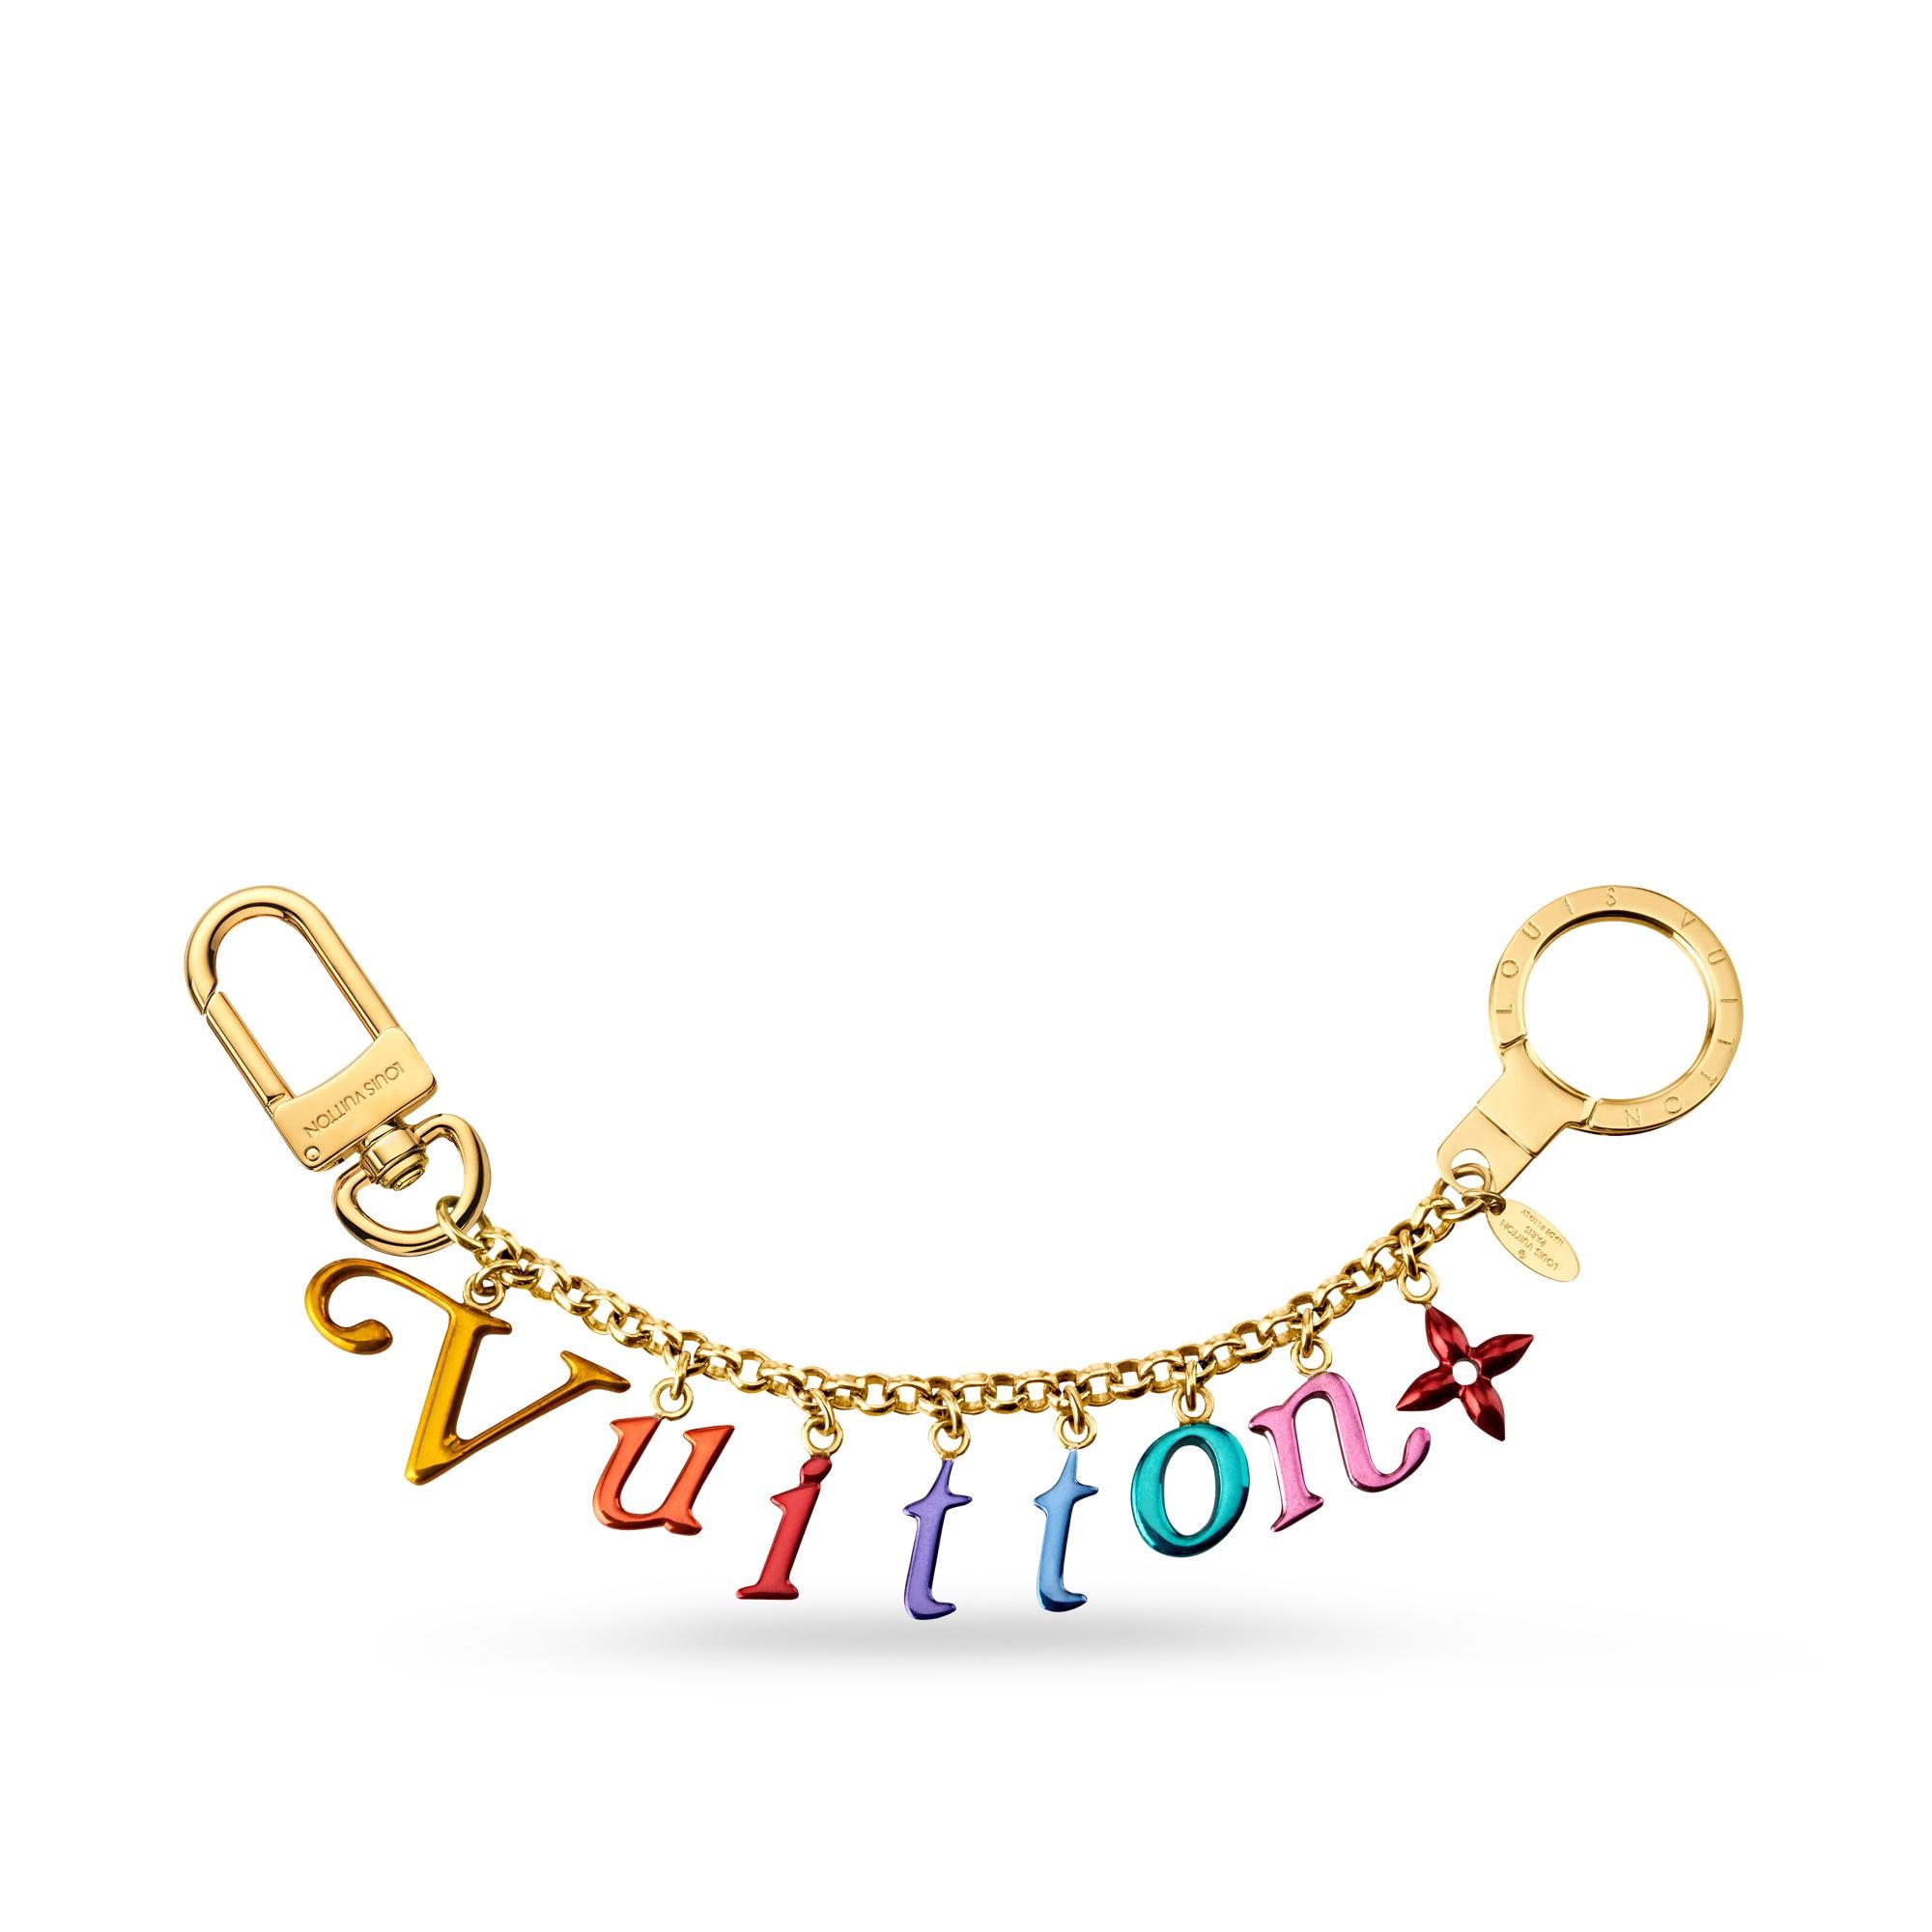 Shop Louis Vuitton Lv new wave bag charm and key holder (M68449) by babybbb